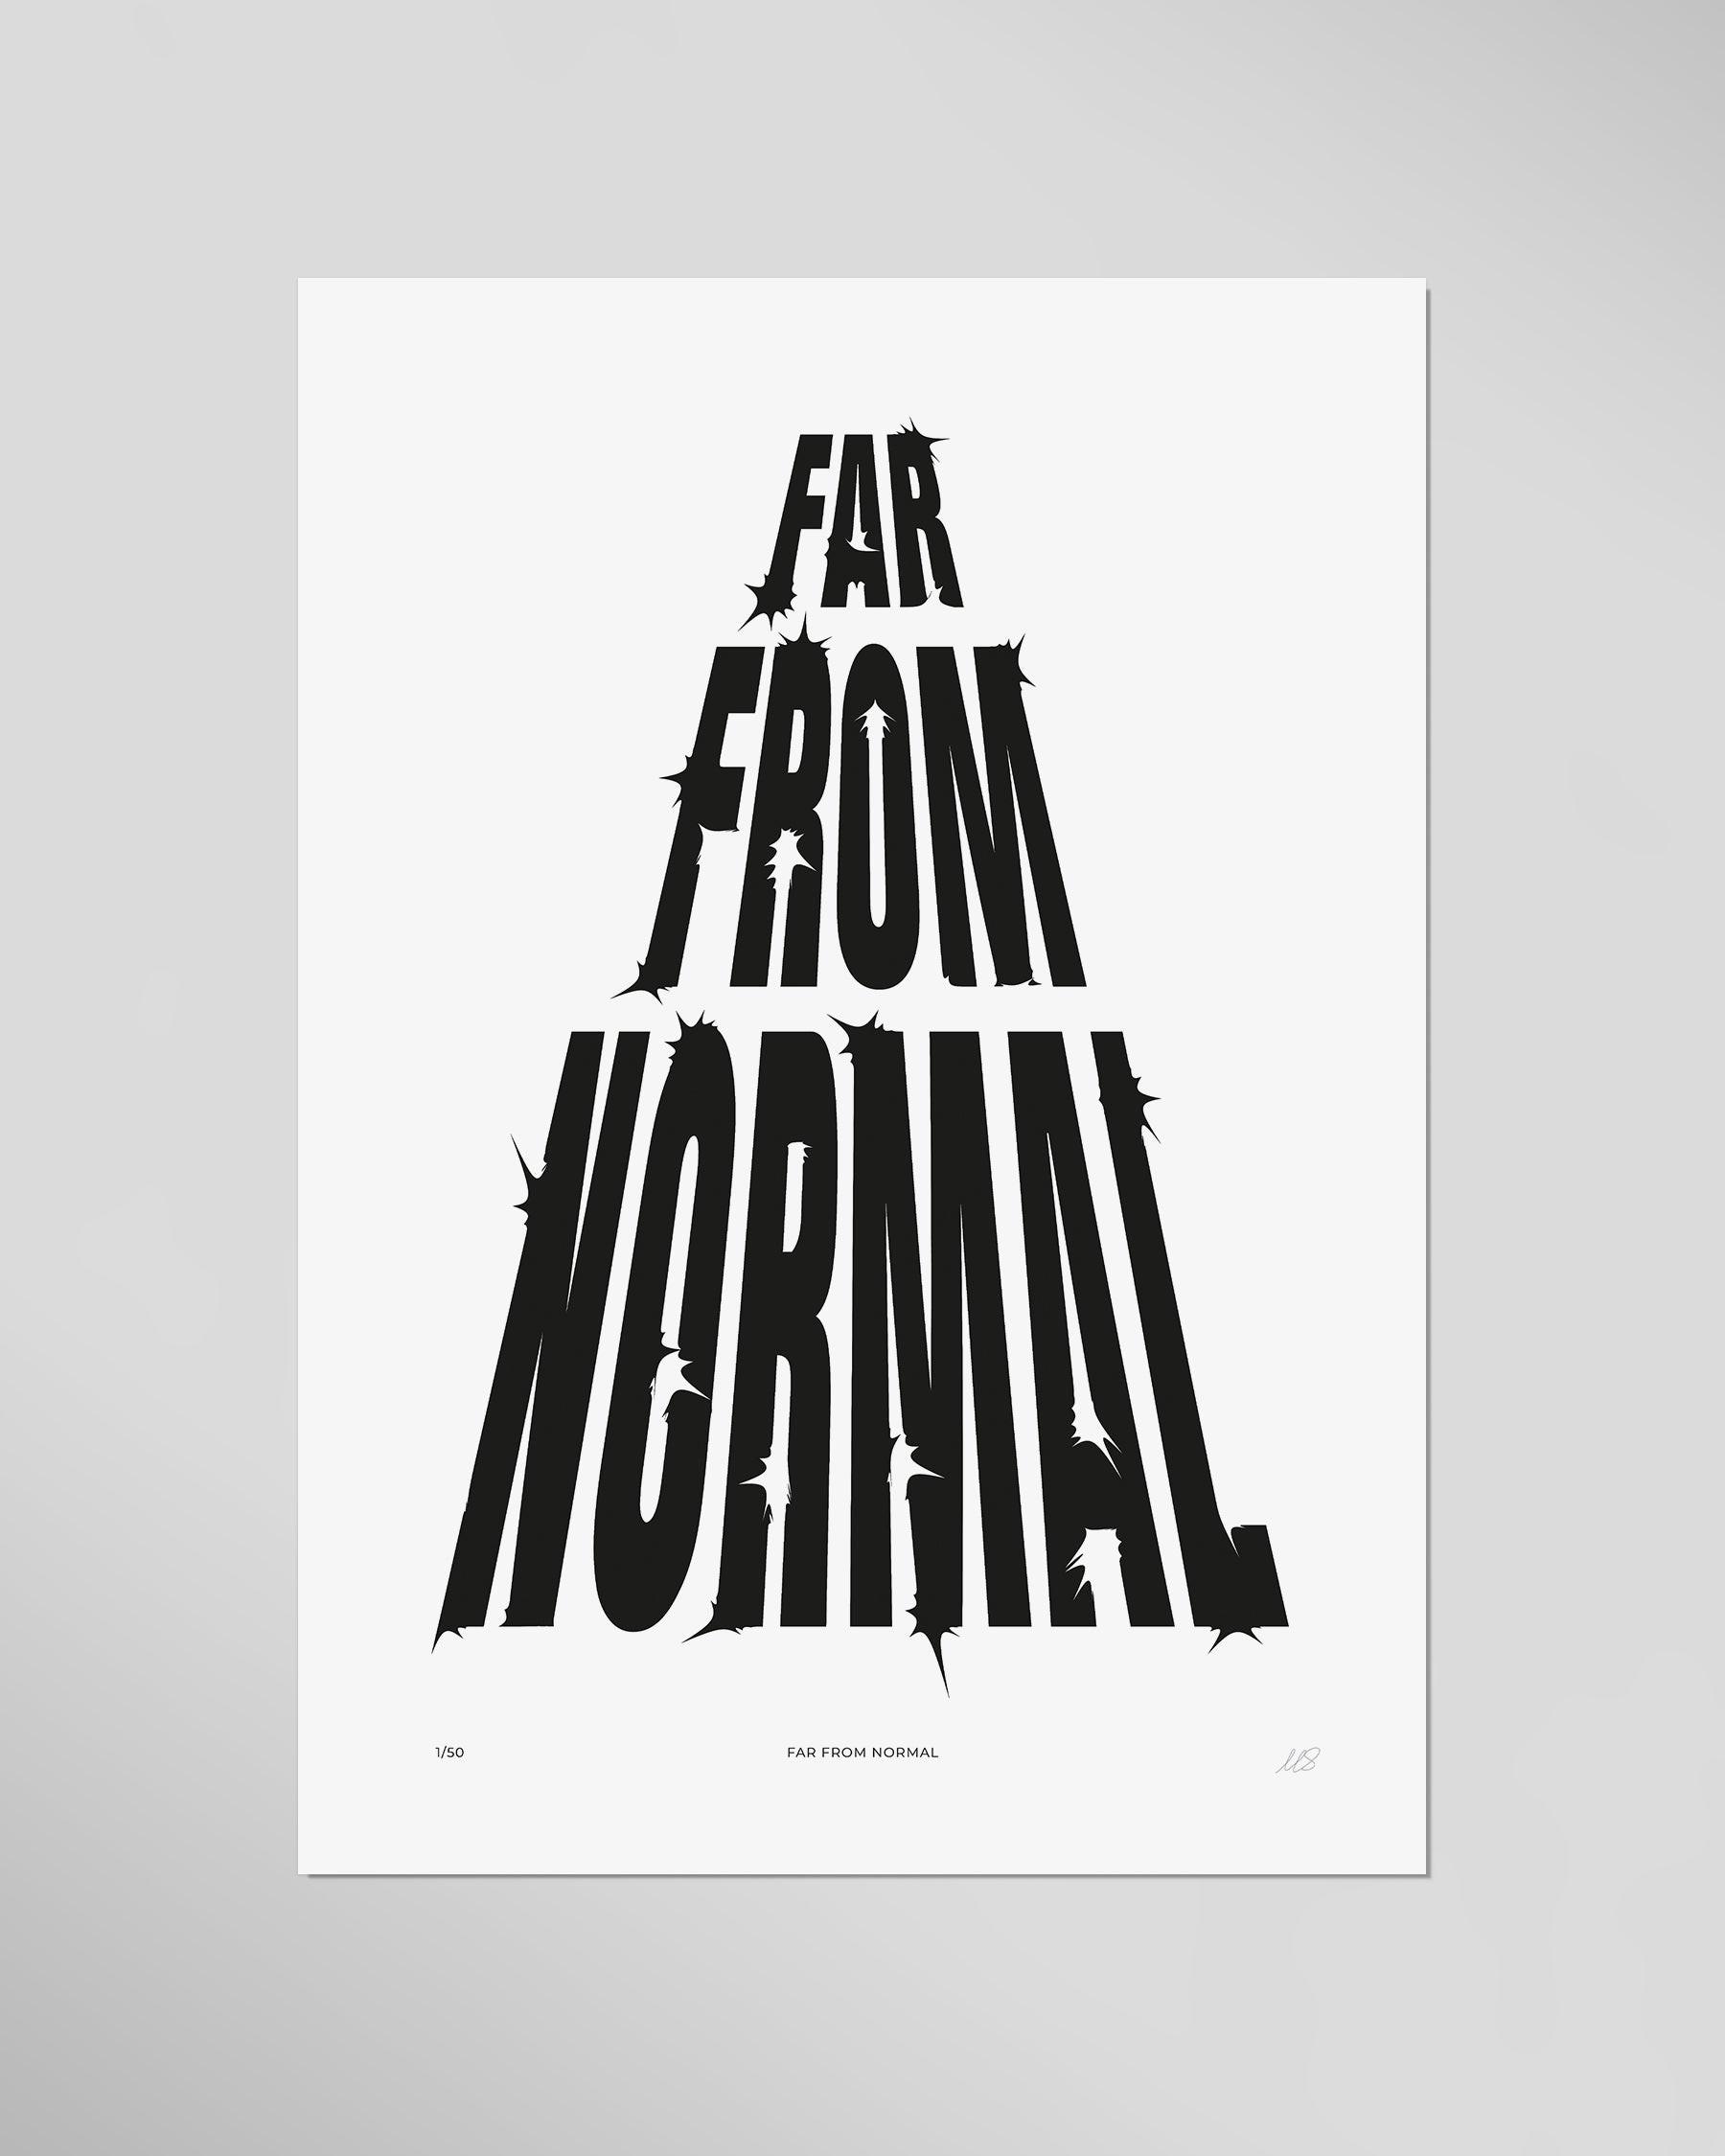 FAR FROM NORMAL